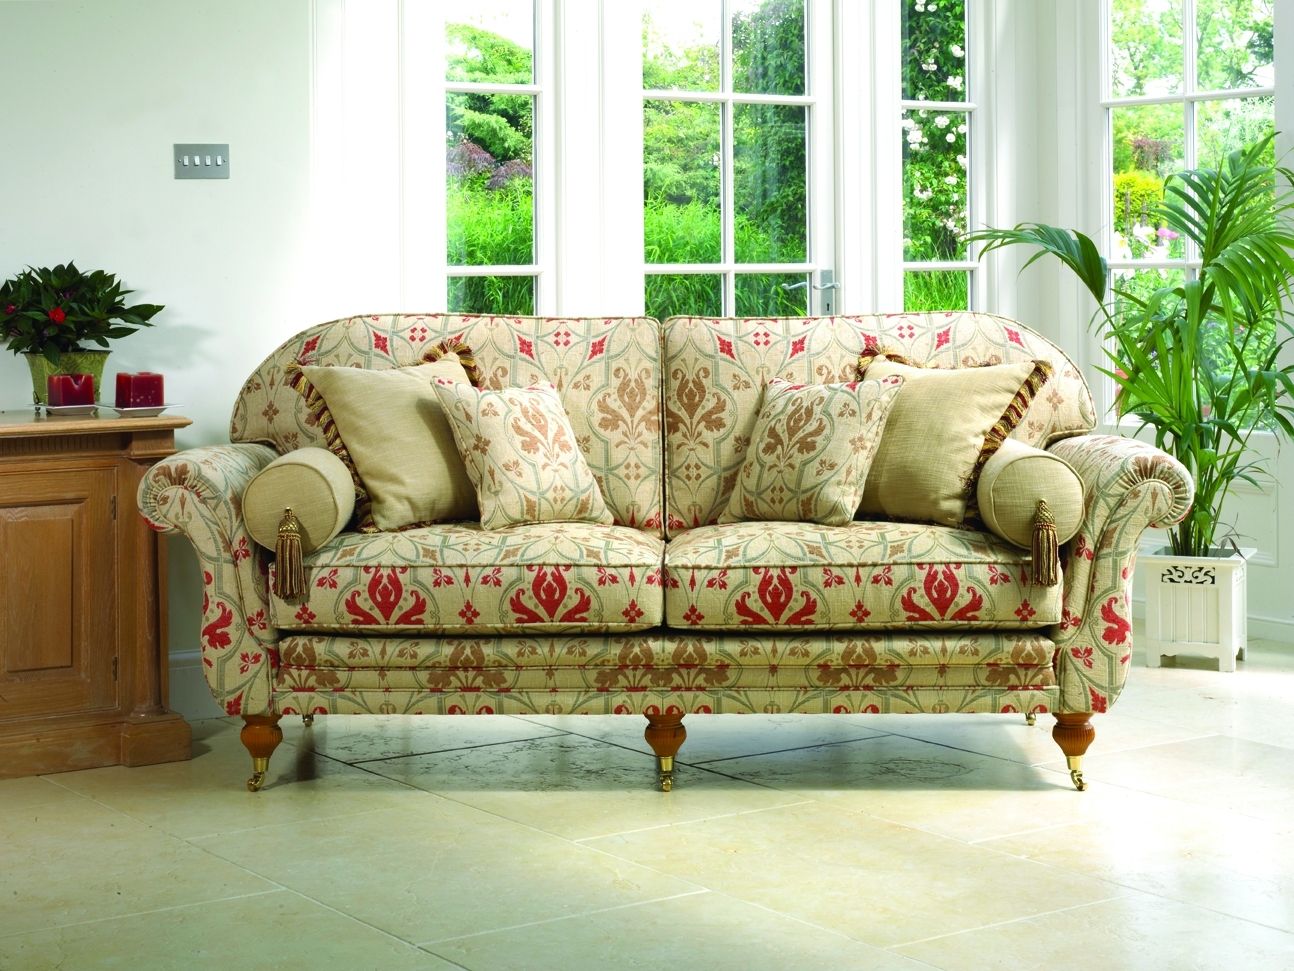 Traditional Sofas & Chairs Leicester Northampton Market Harborough Intended For Traditional Sofas (View 3 of 10)